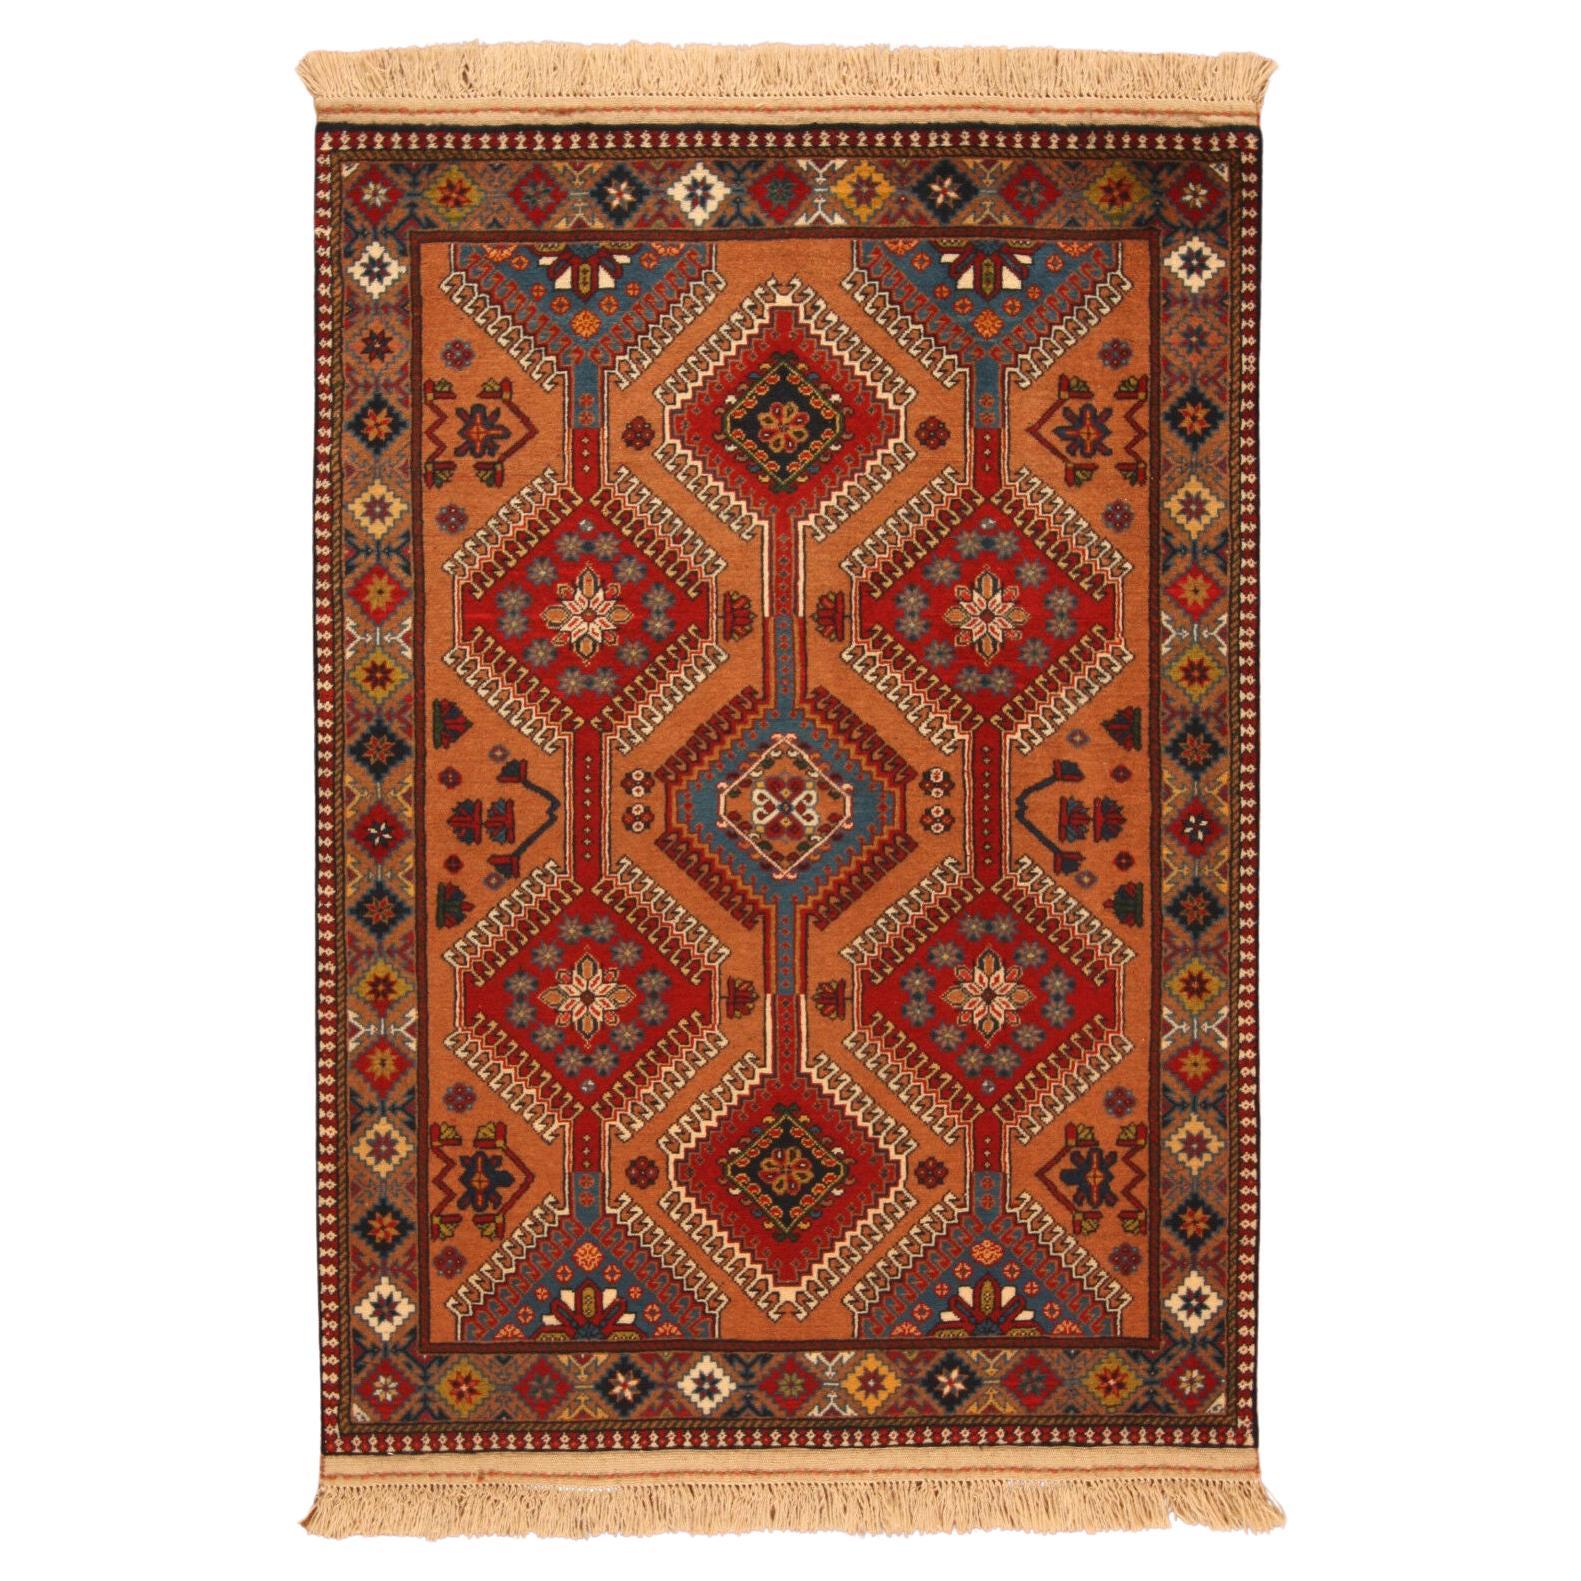 Handmade Vintage Persian Style Yalameh Rug 3.4' x 4.7', 1990s - 1T17 For Sale